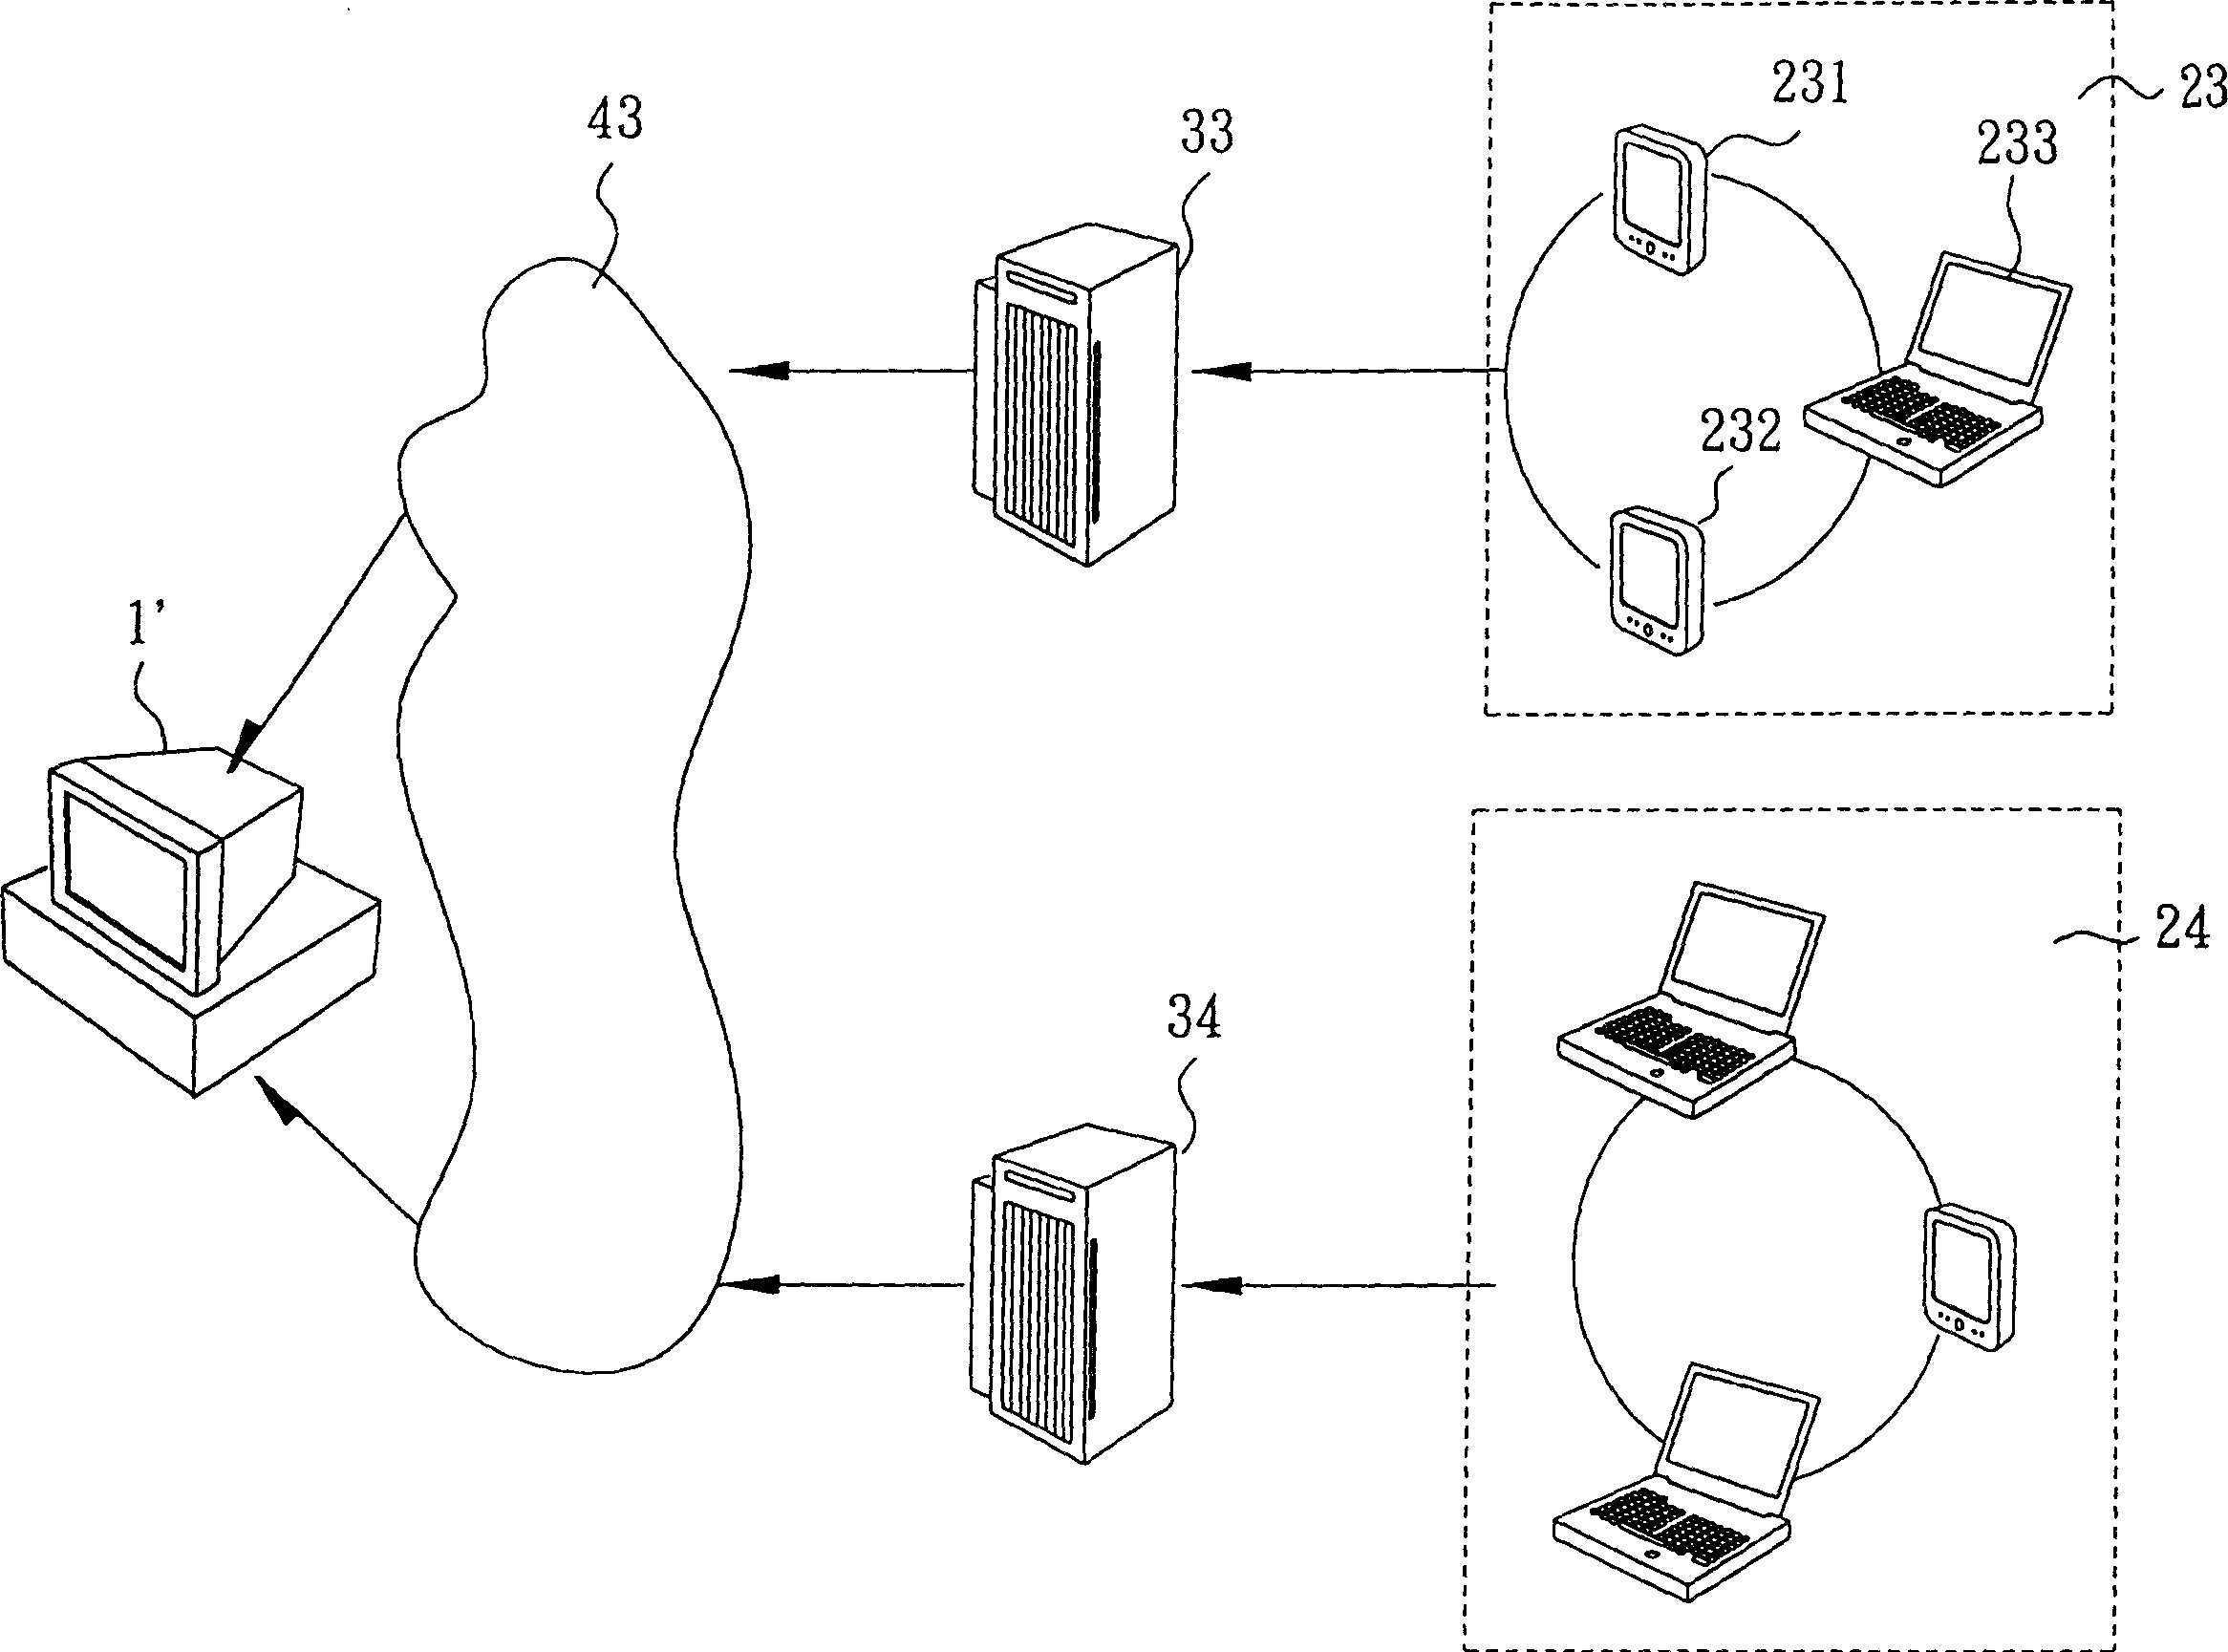 Topological detecting method for mobile IP system